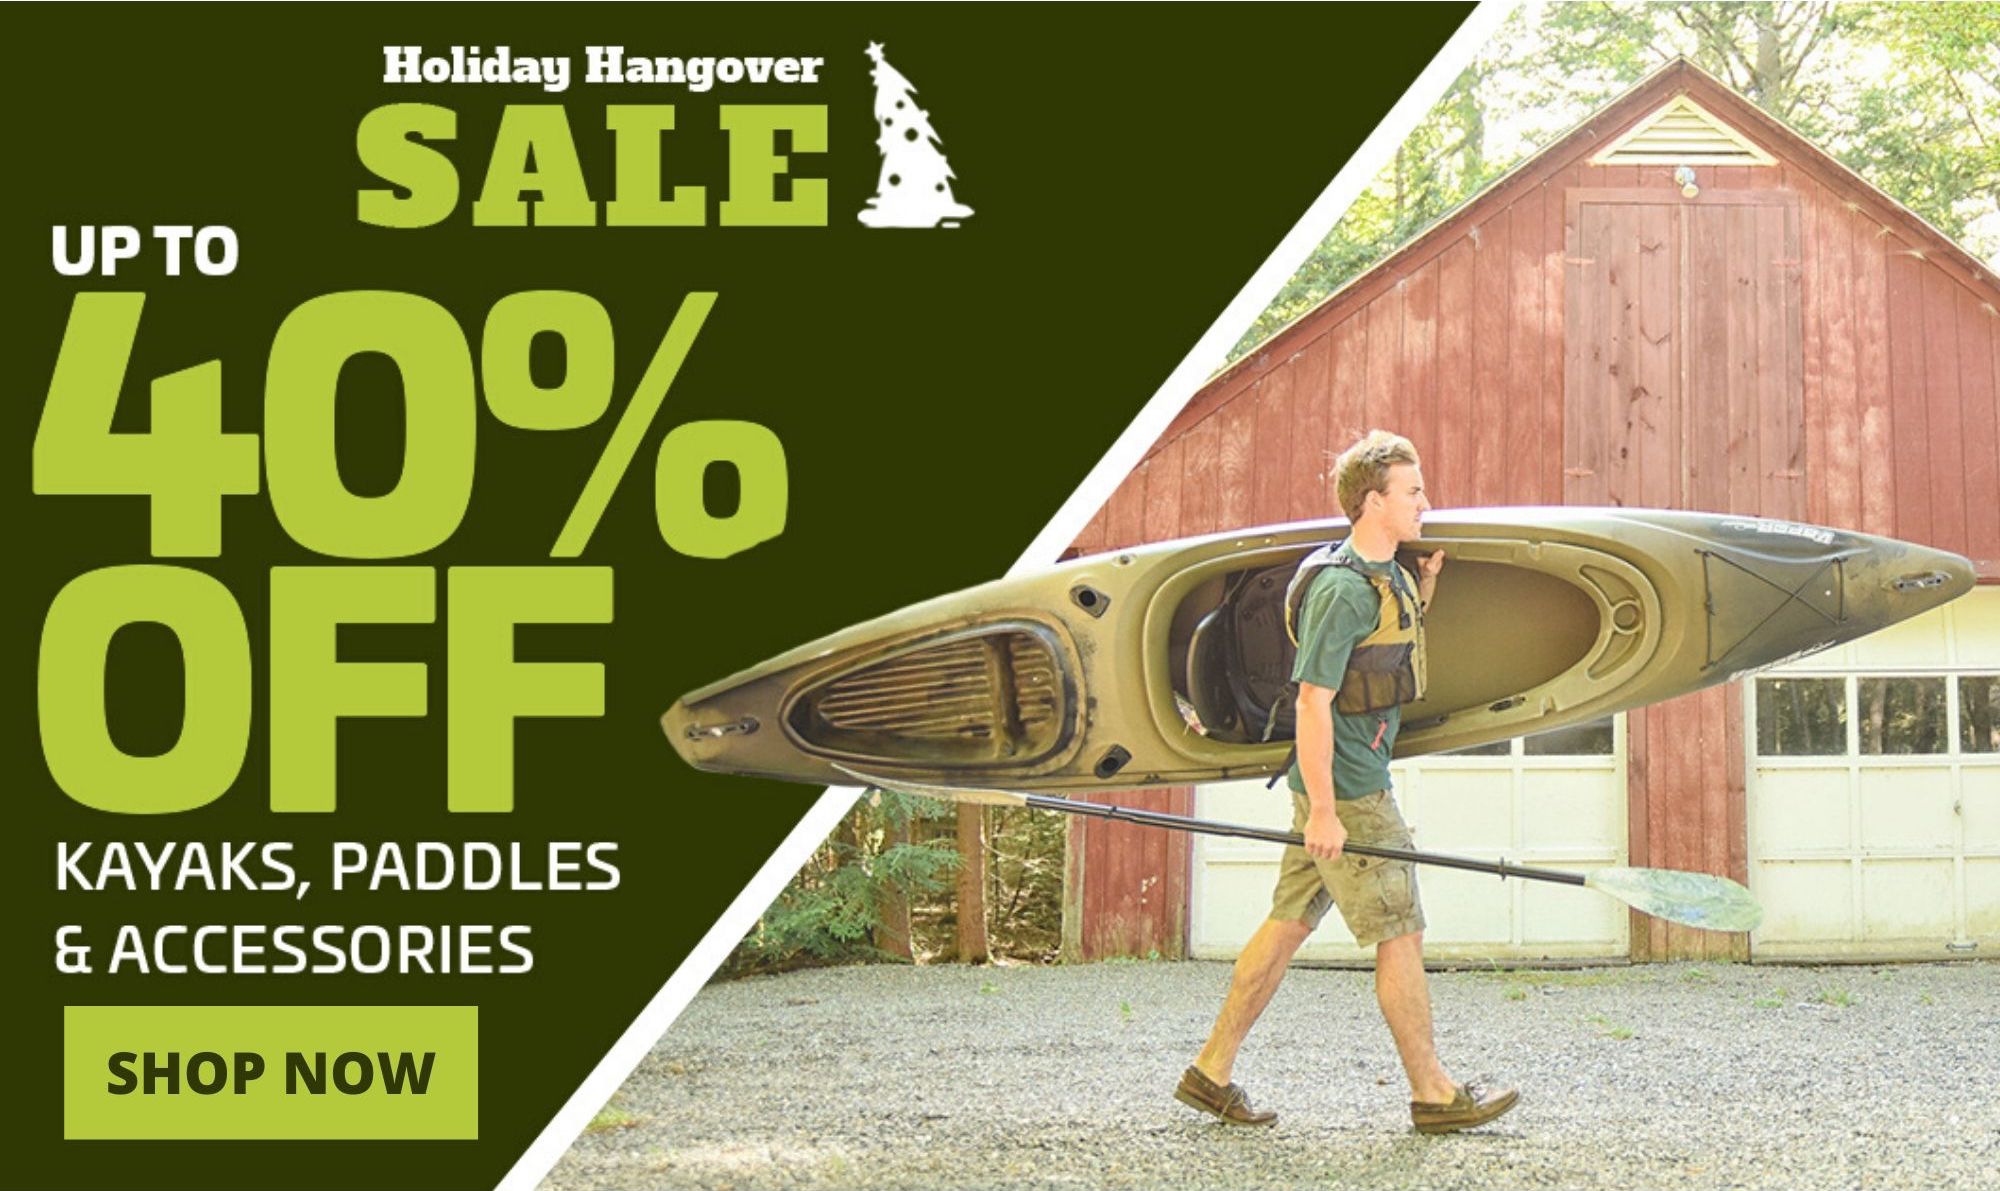 Up To 40% Off Kayaks, Paddles & Accessories